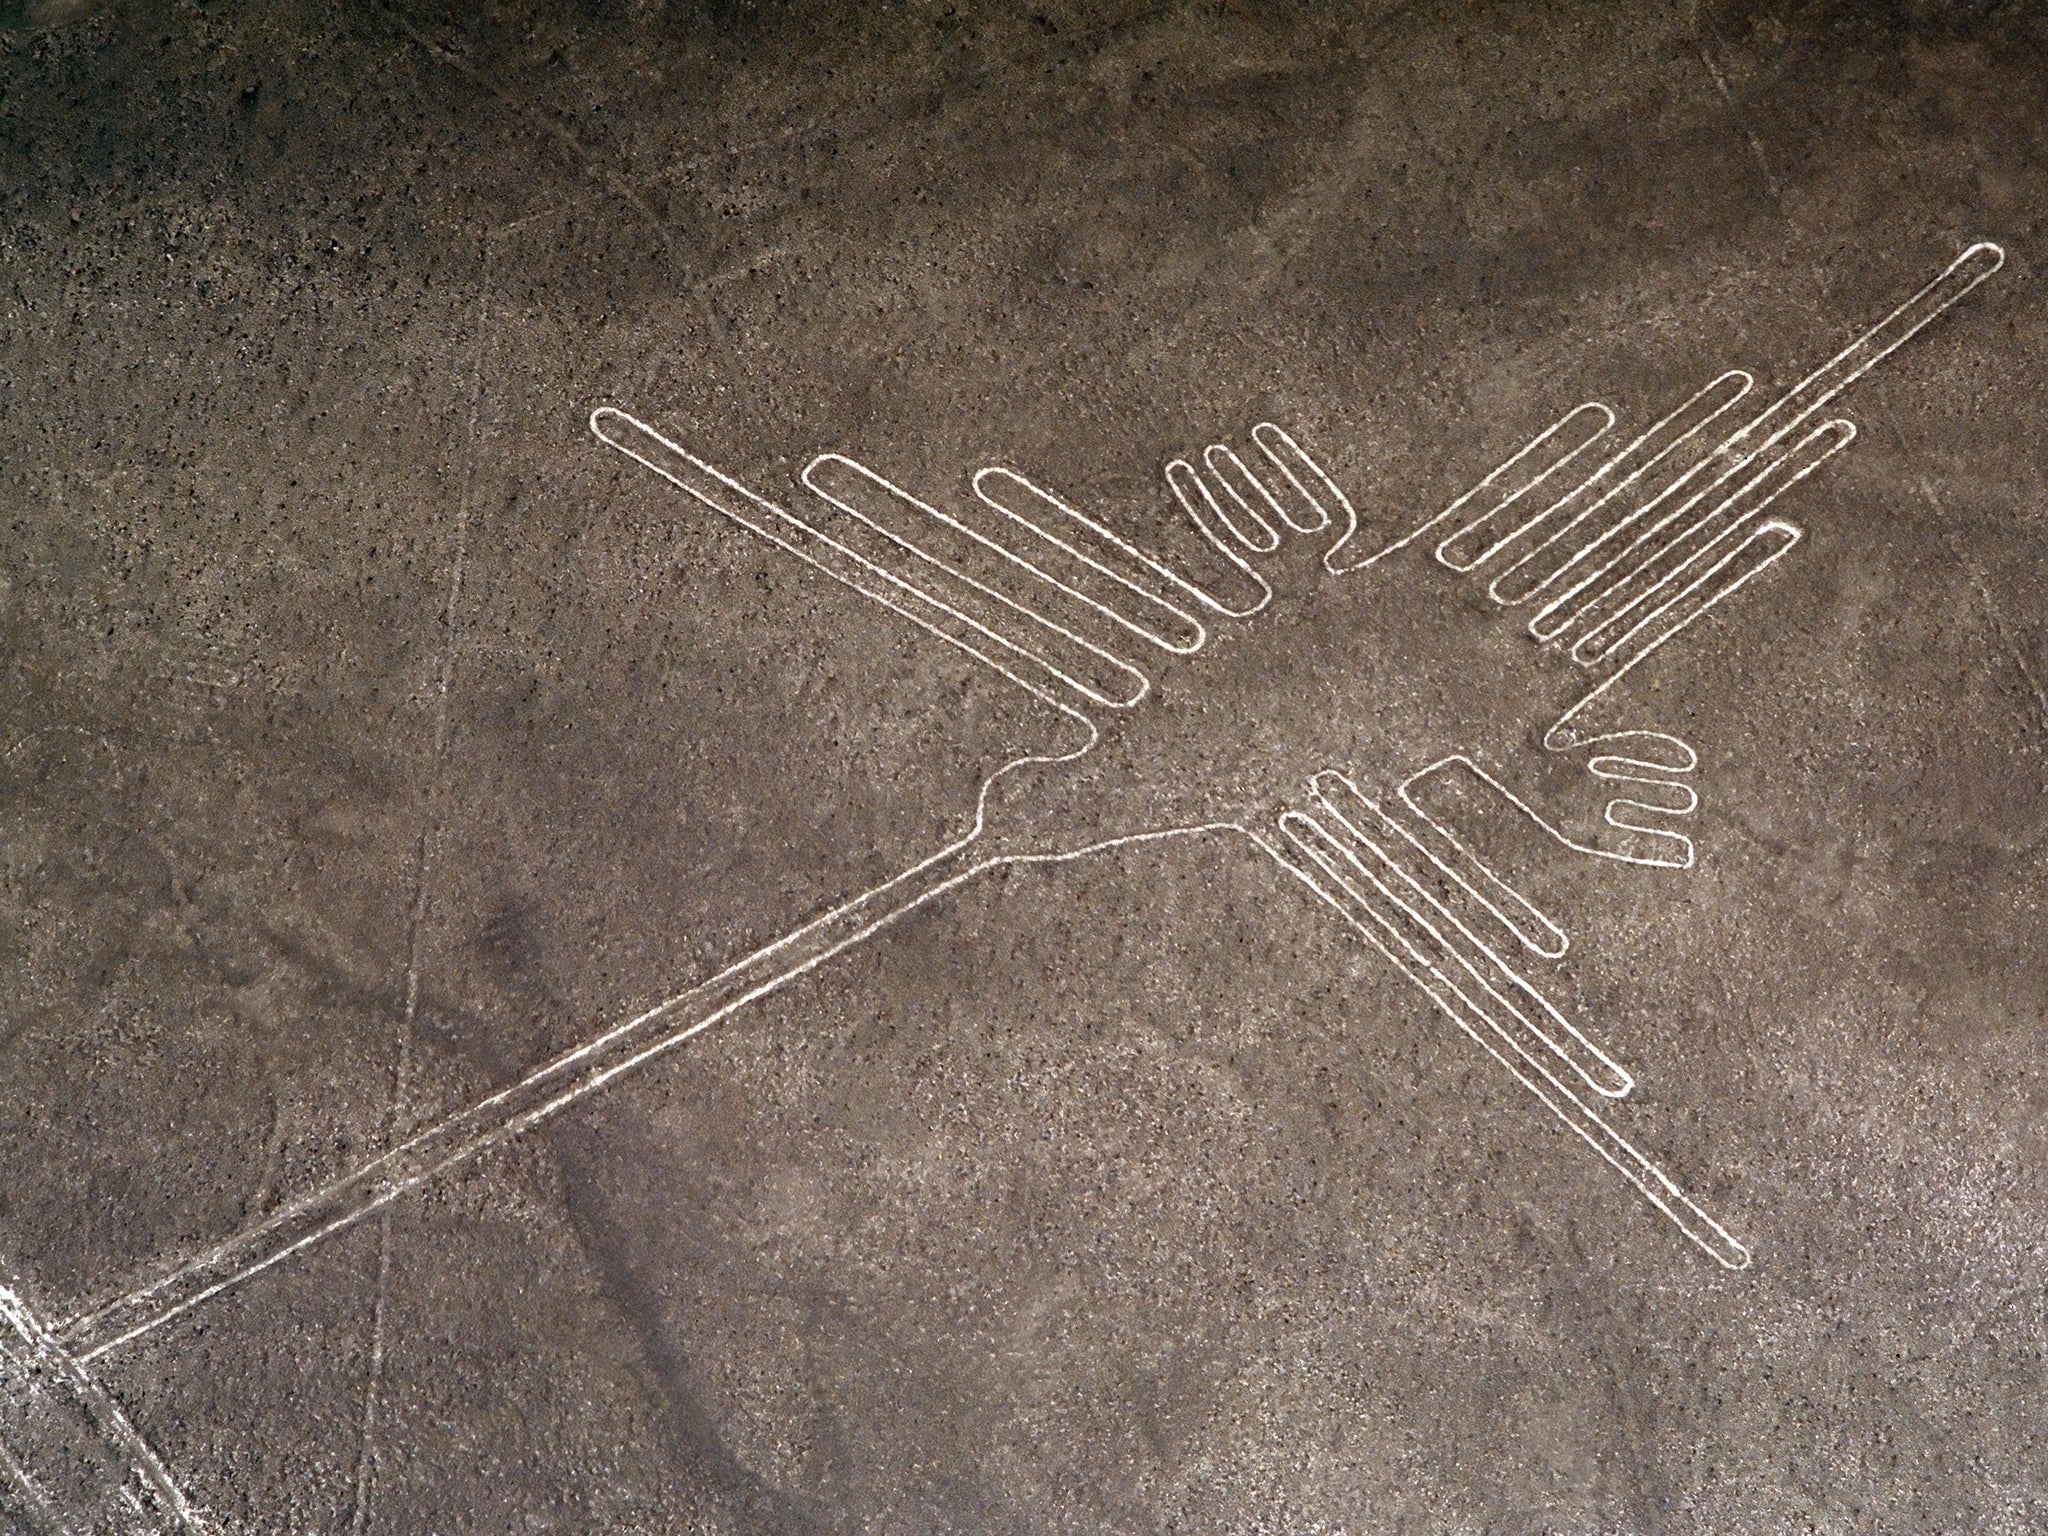 Nazca lines More than 100 ancient images found etched into the